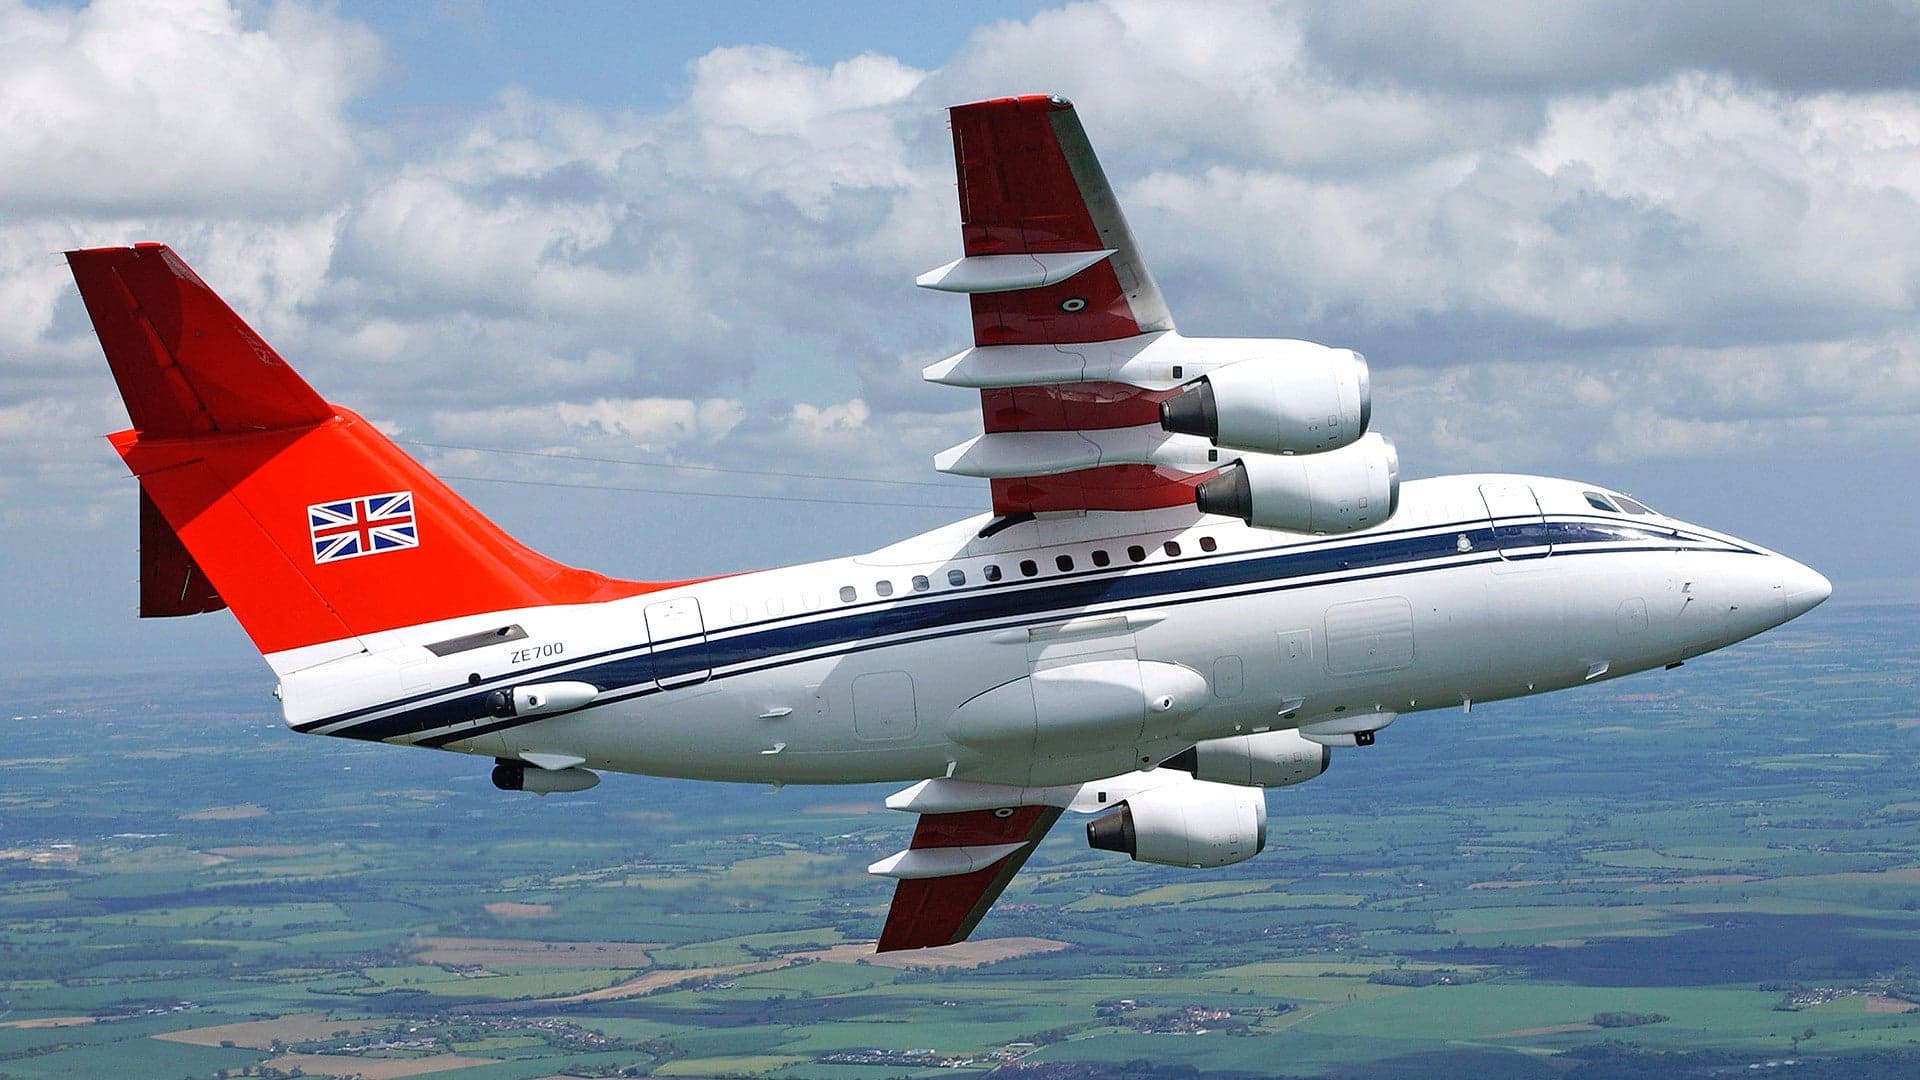 RAF To Sell-Off Its BAe 146 Military Transports That Also Cart Around the Royals